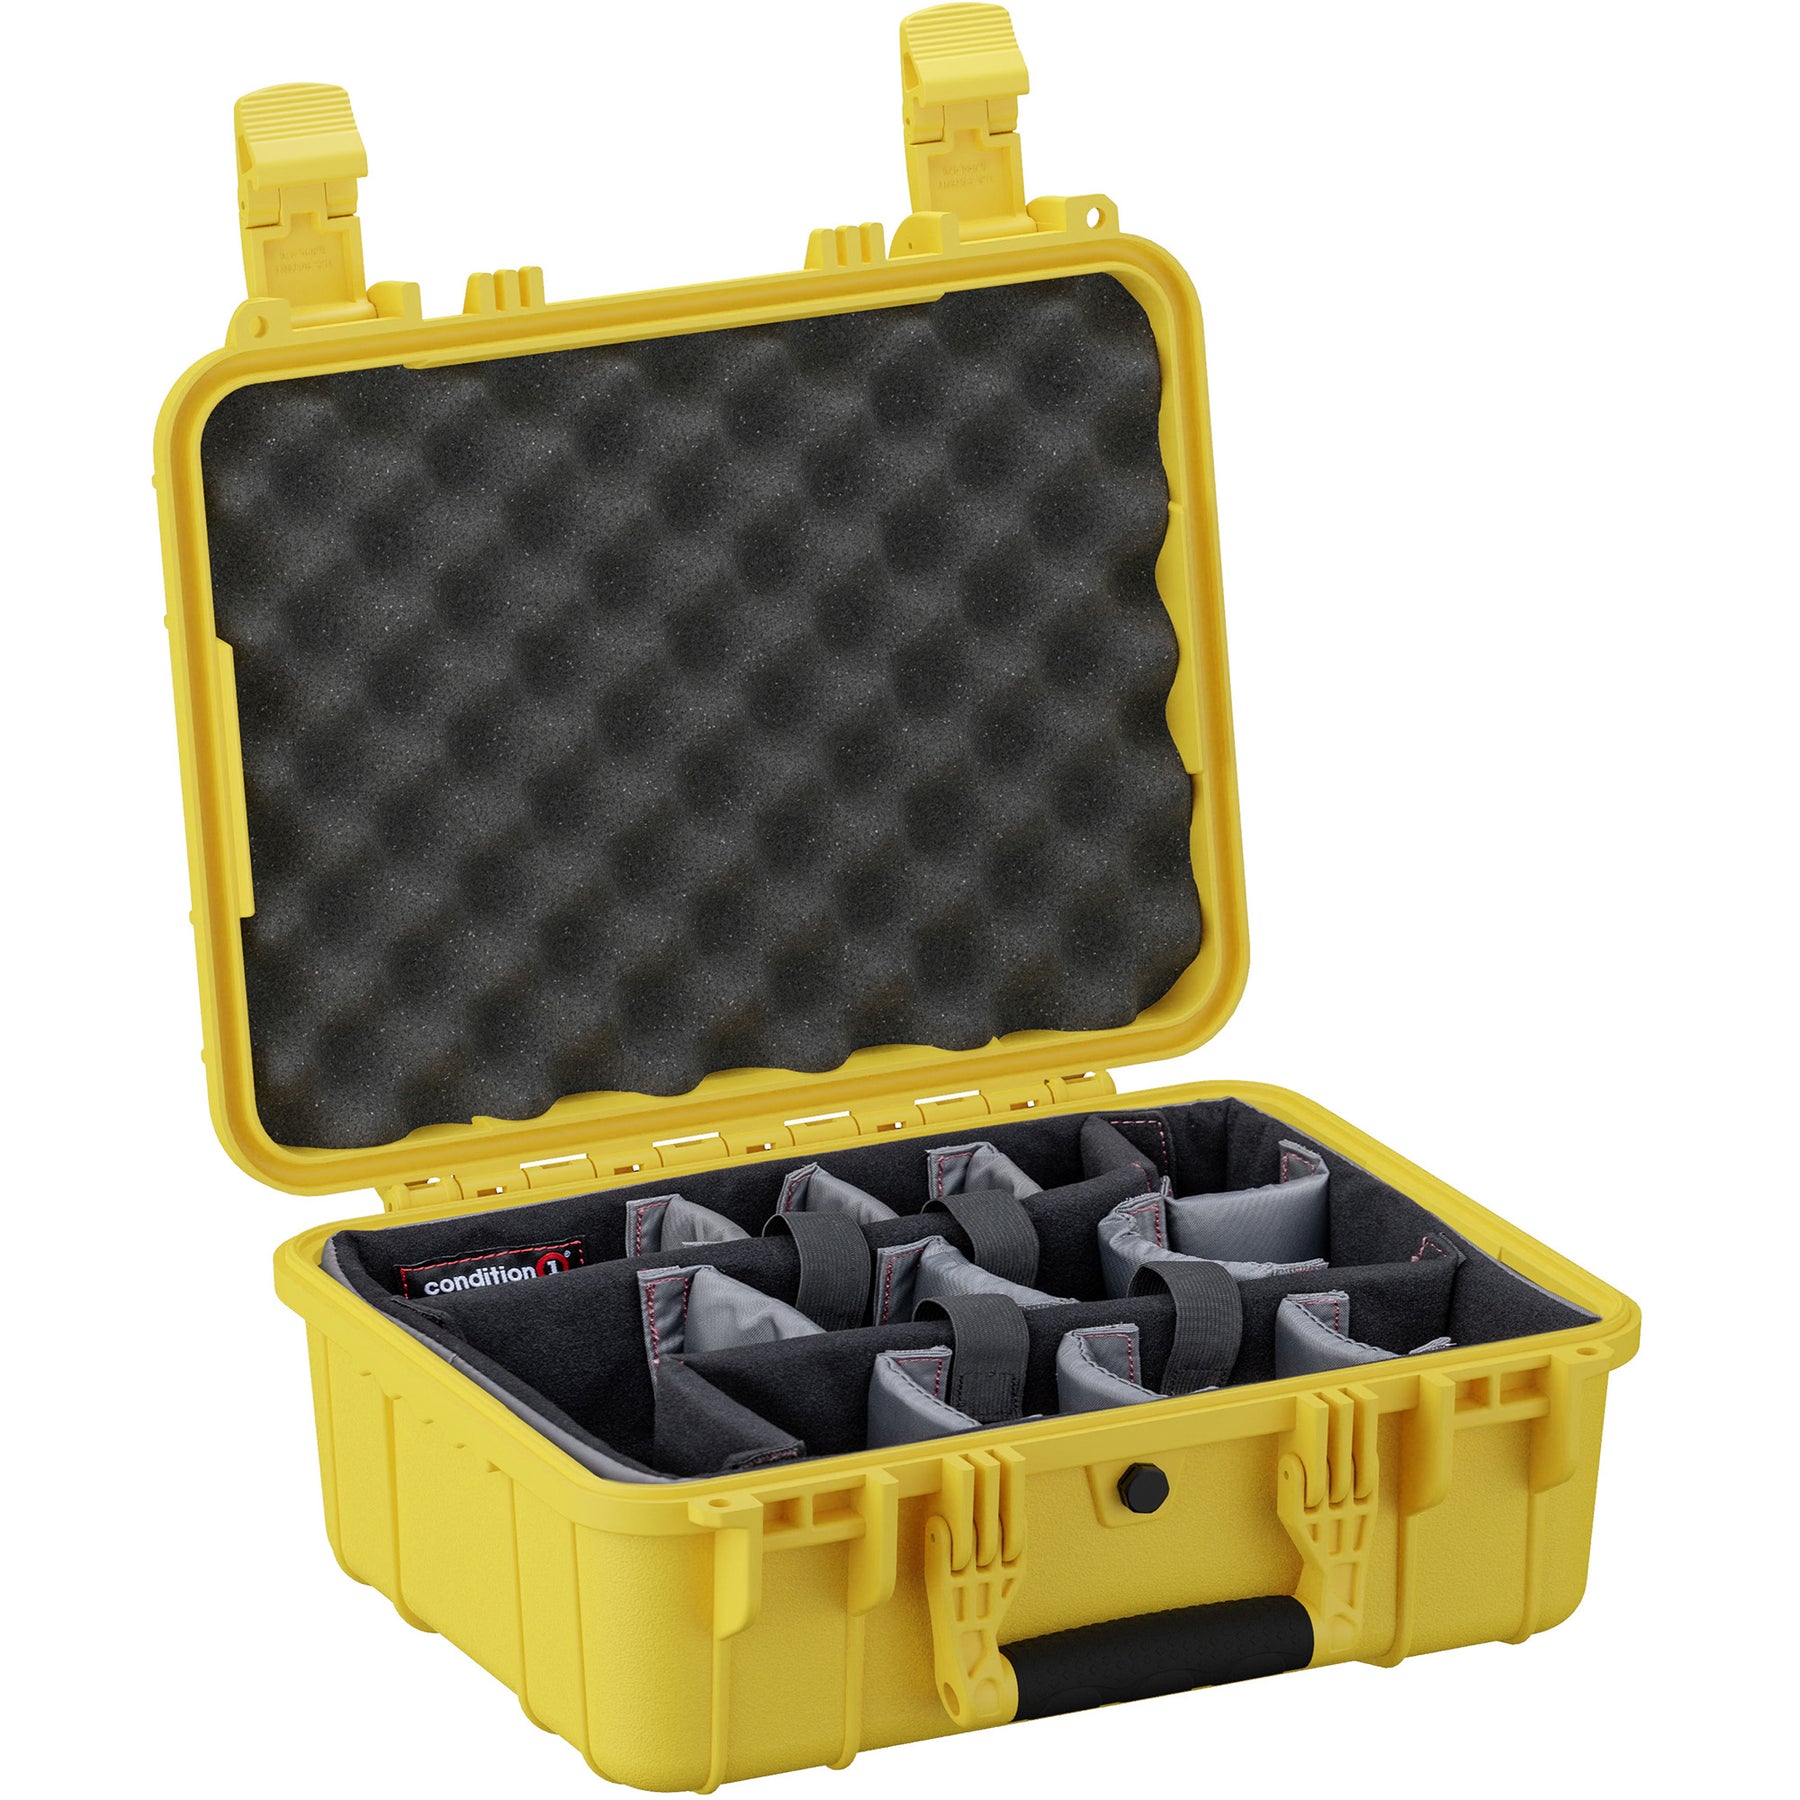 Condition 1 #024 Yellow Airtight/Watertight Case with Pluckable Foam